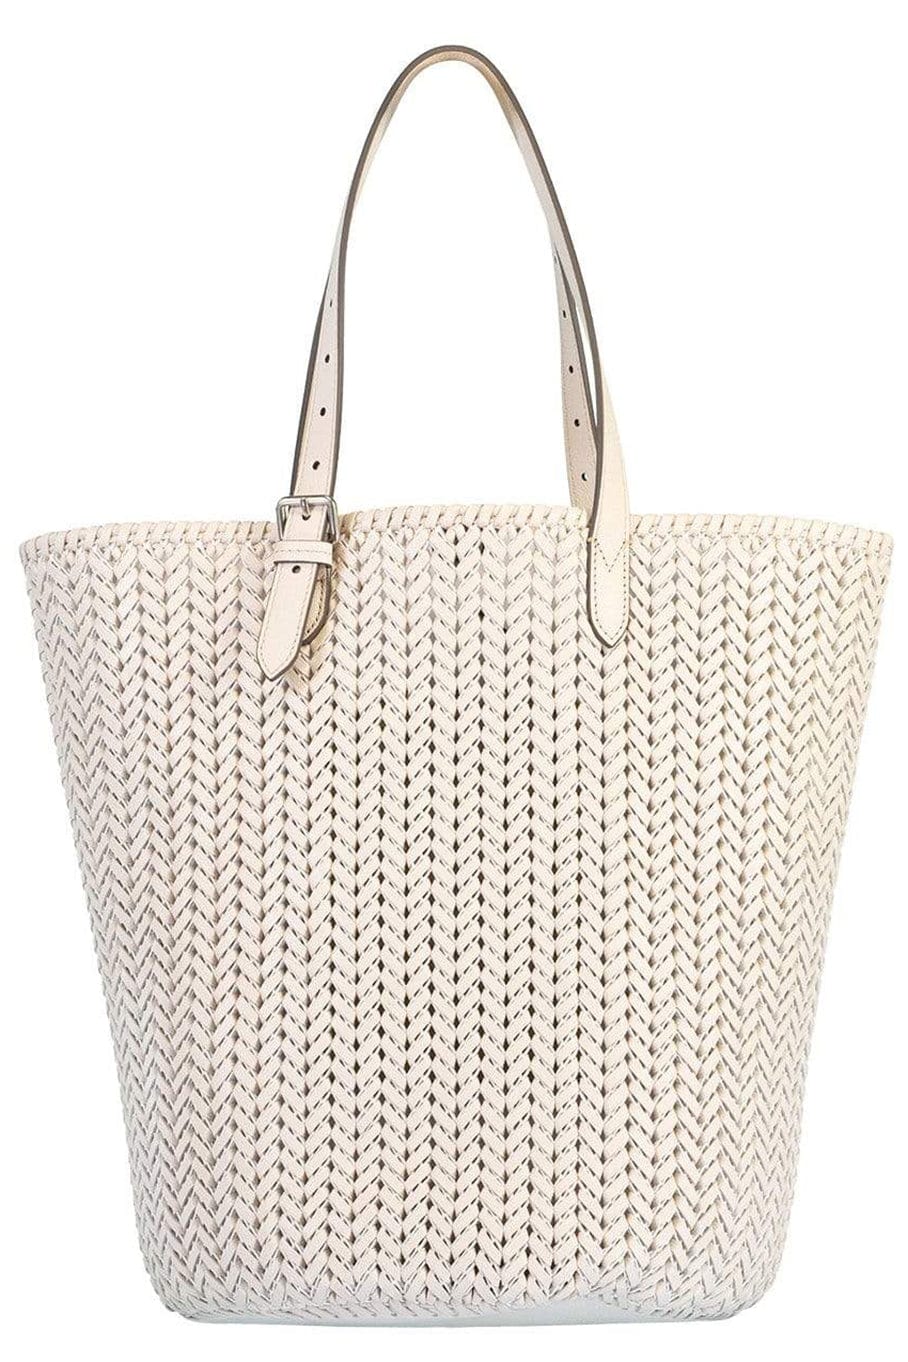 ANYA HINDMARCH-The Neeson Cylinder Tote-CHALK